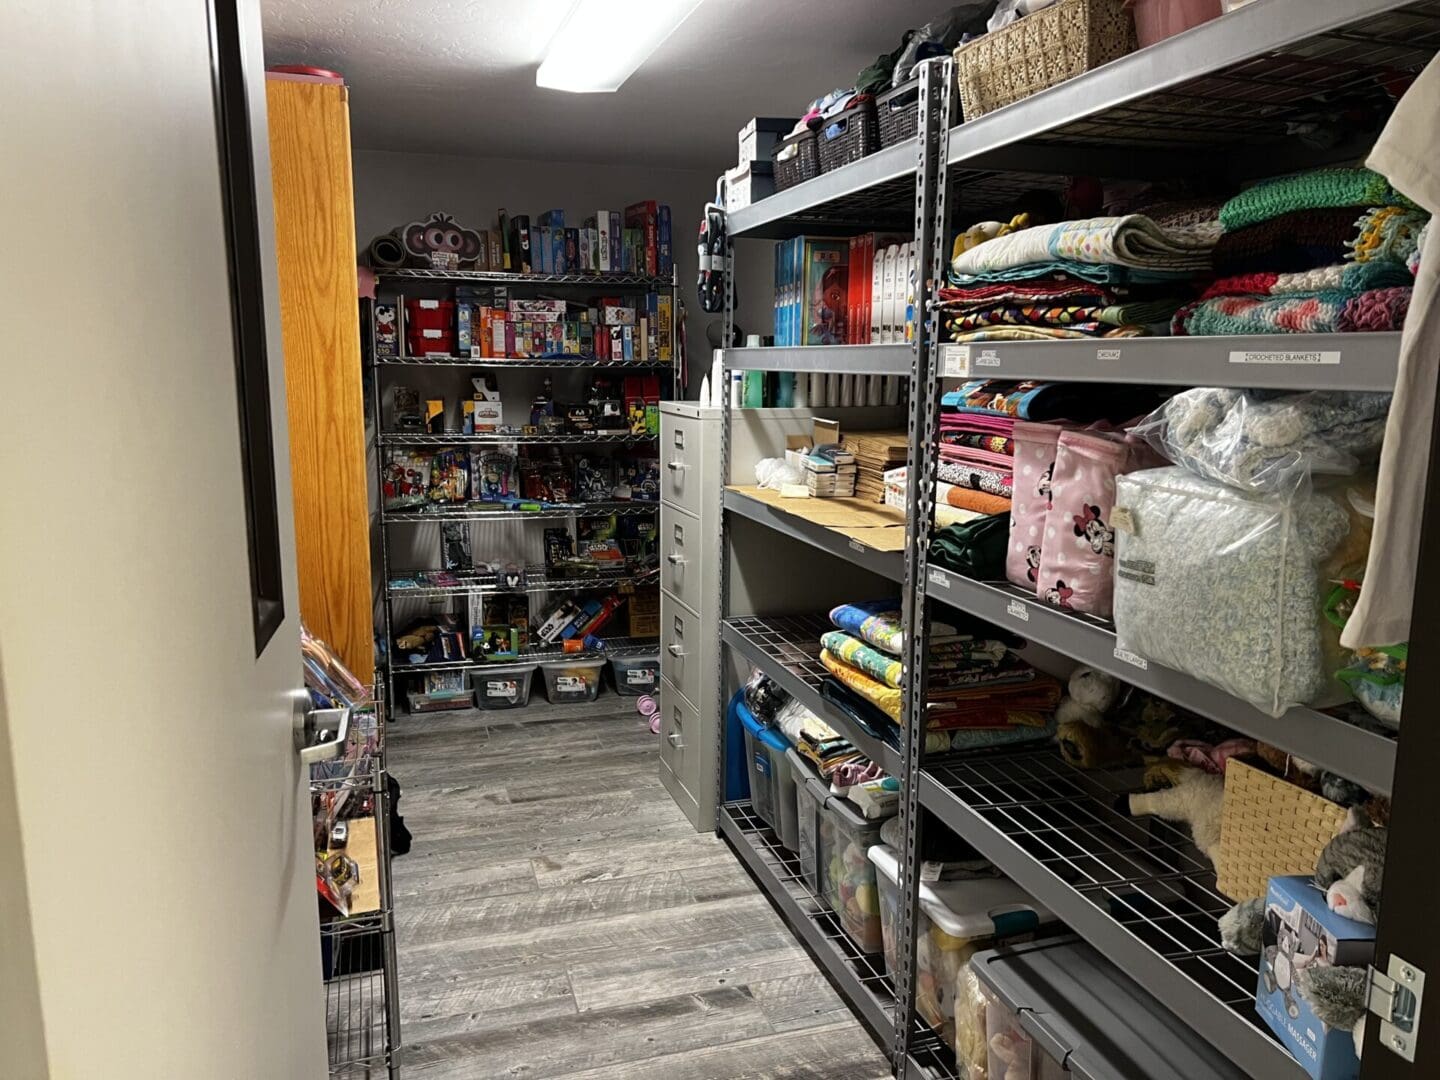 A room filled with shelves and lots of items.